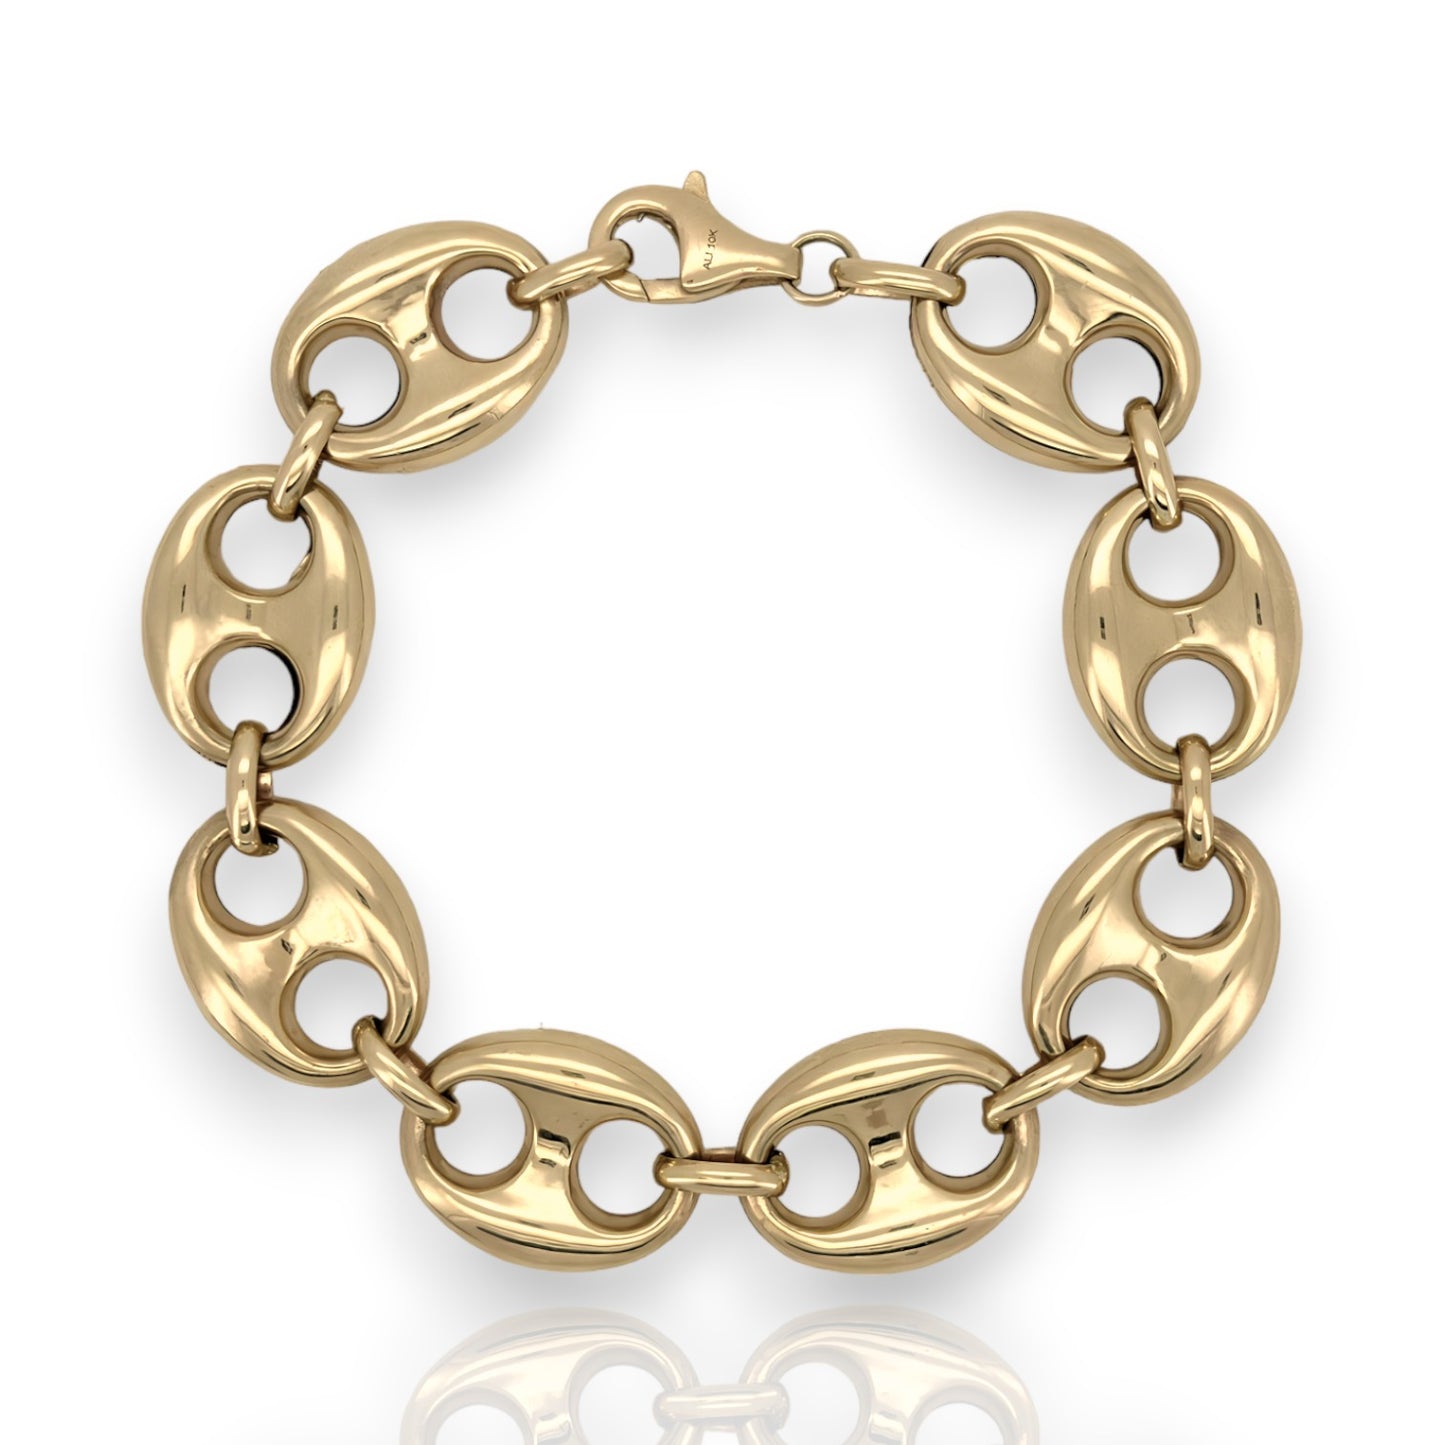 Puffed Gucci Link Chain Bracelet - 10K Yellow Gold - Hollow